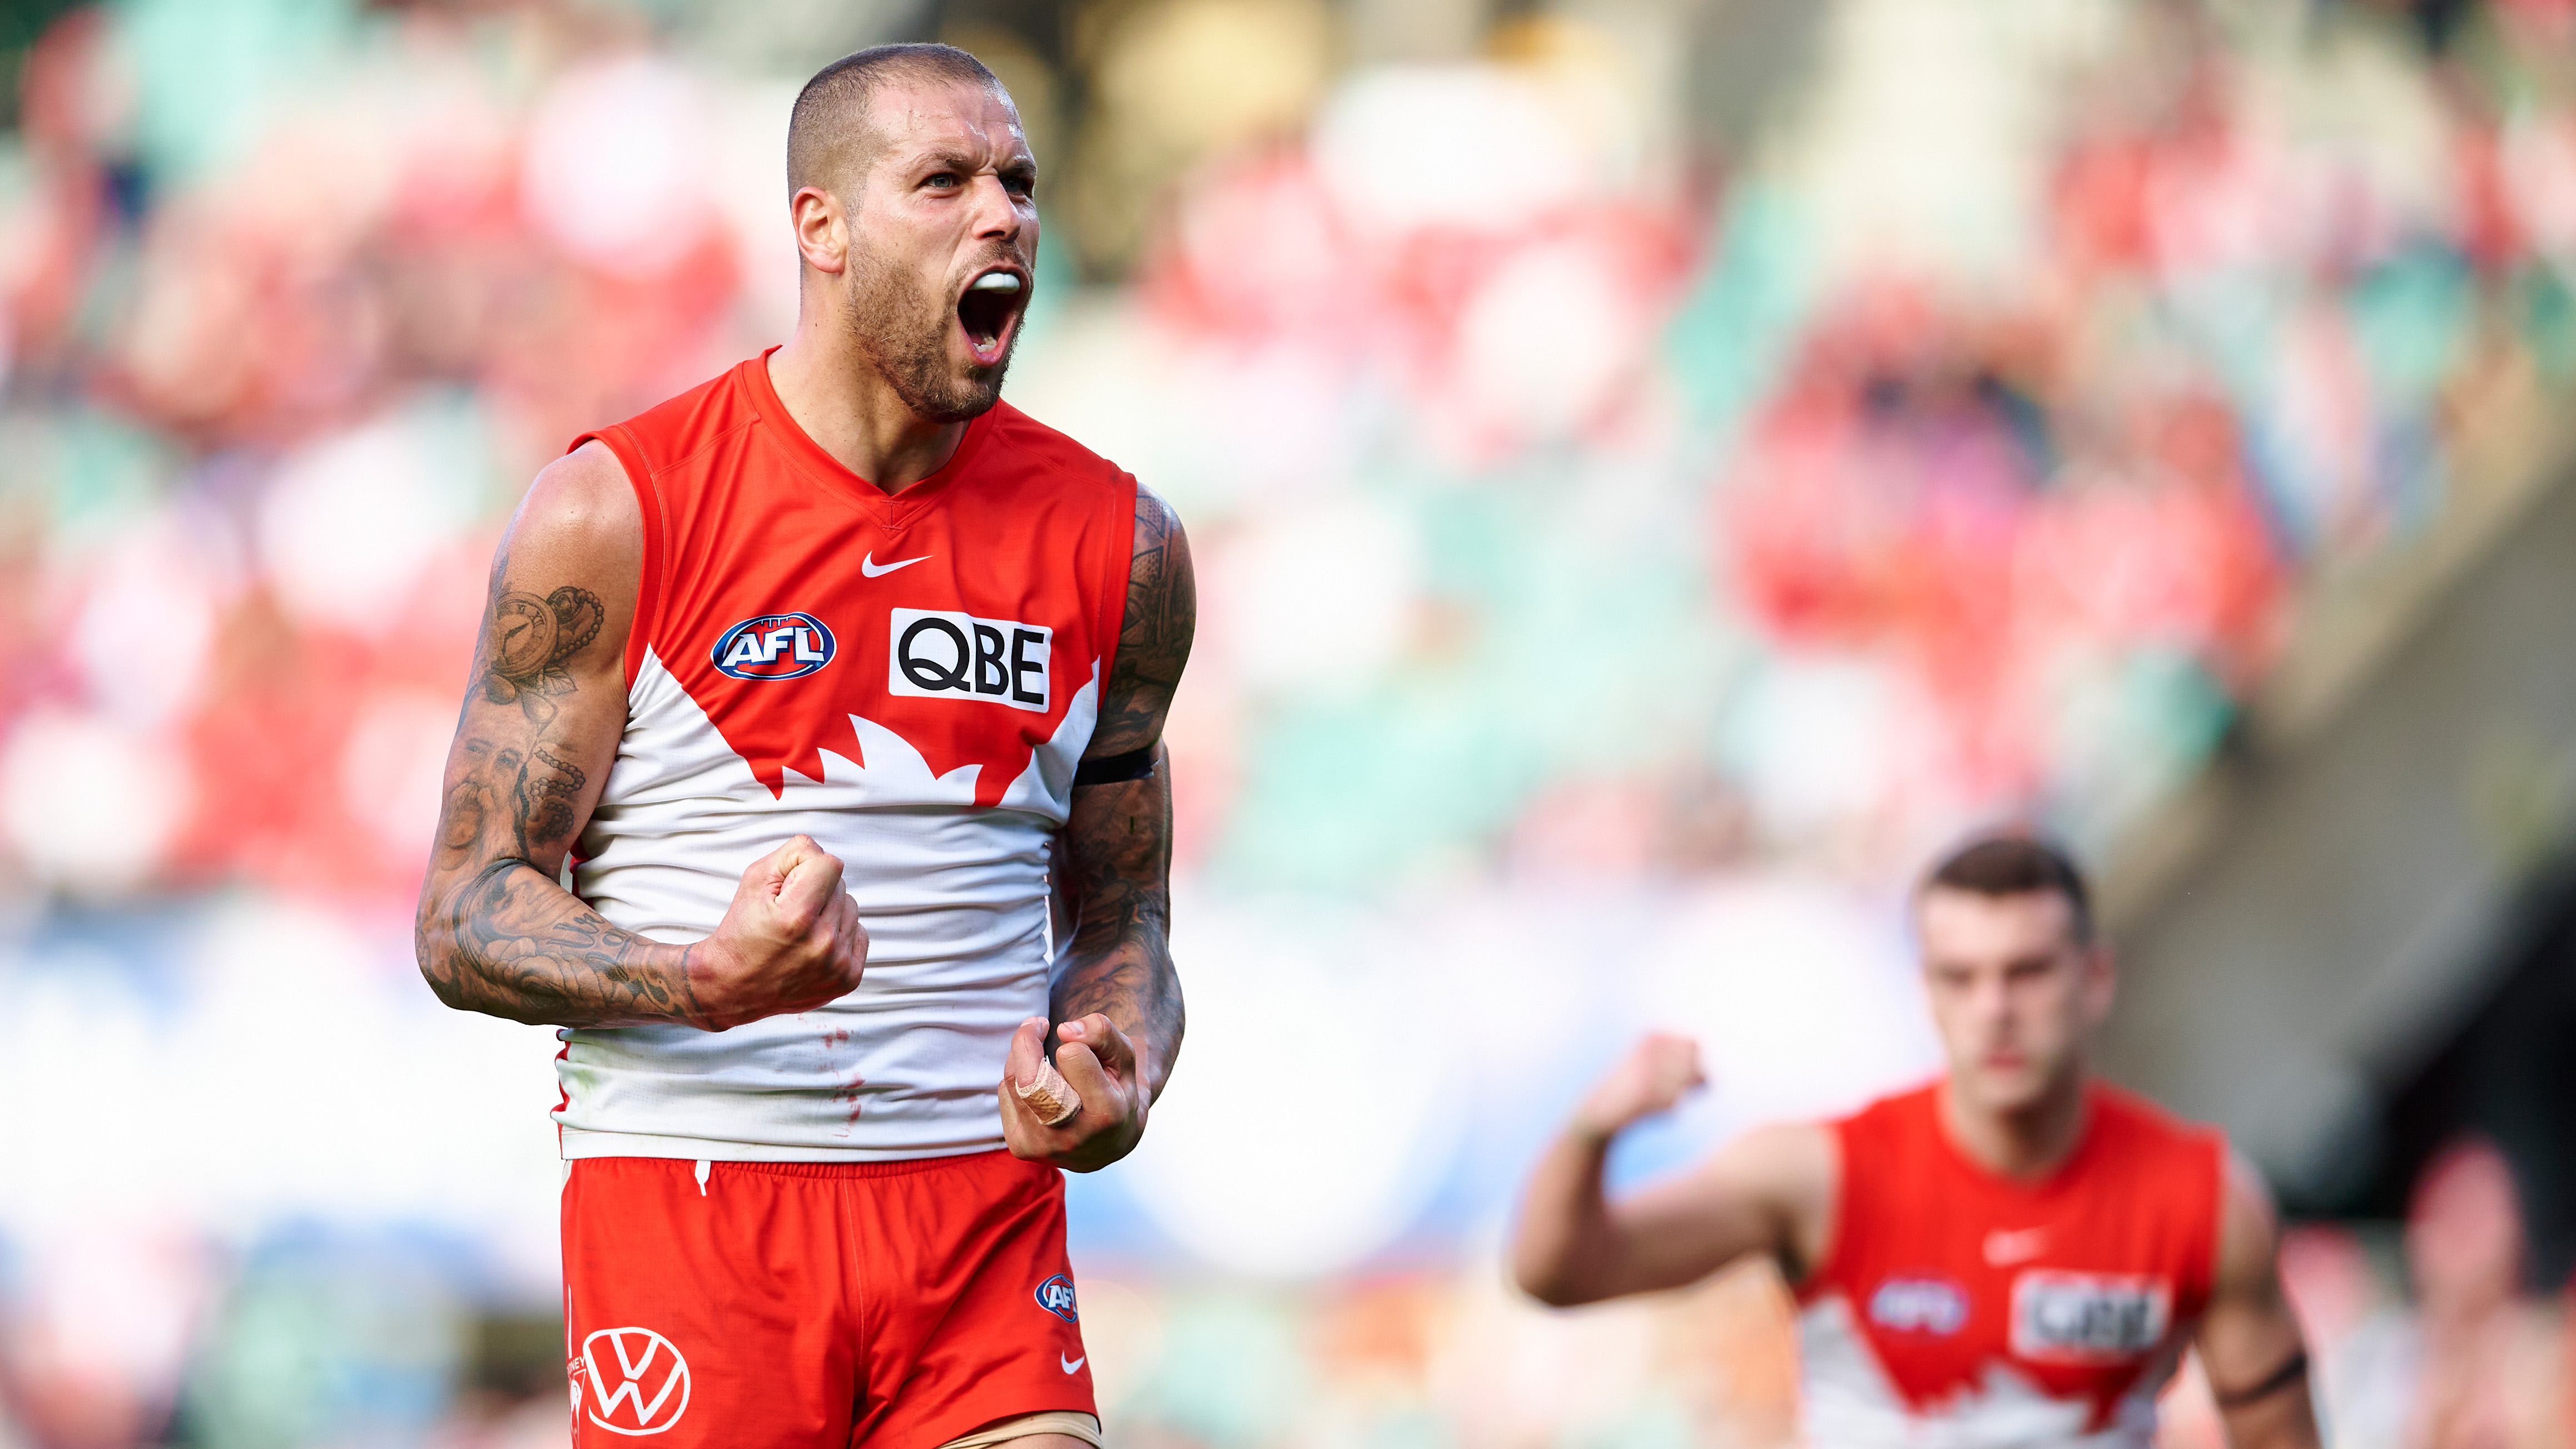 Lance Franklin of the Swans celebrates kicking a goal during the round 19 AFL match between the Sydney Swans and the Adelaide Crows at Sydney Cricket Ground on July 23, 2022 in Sydney, Australia. (Photo by Brett Hemmings/AFL Photos/via Getty Images)